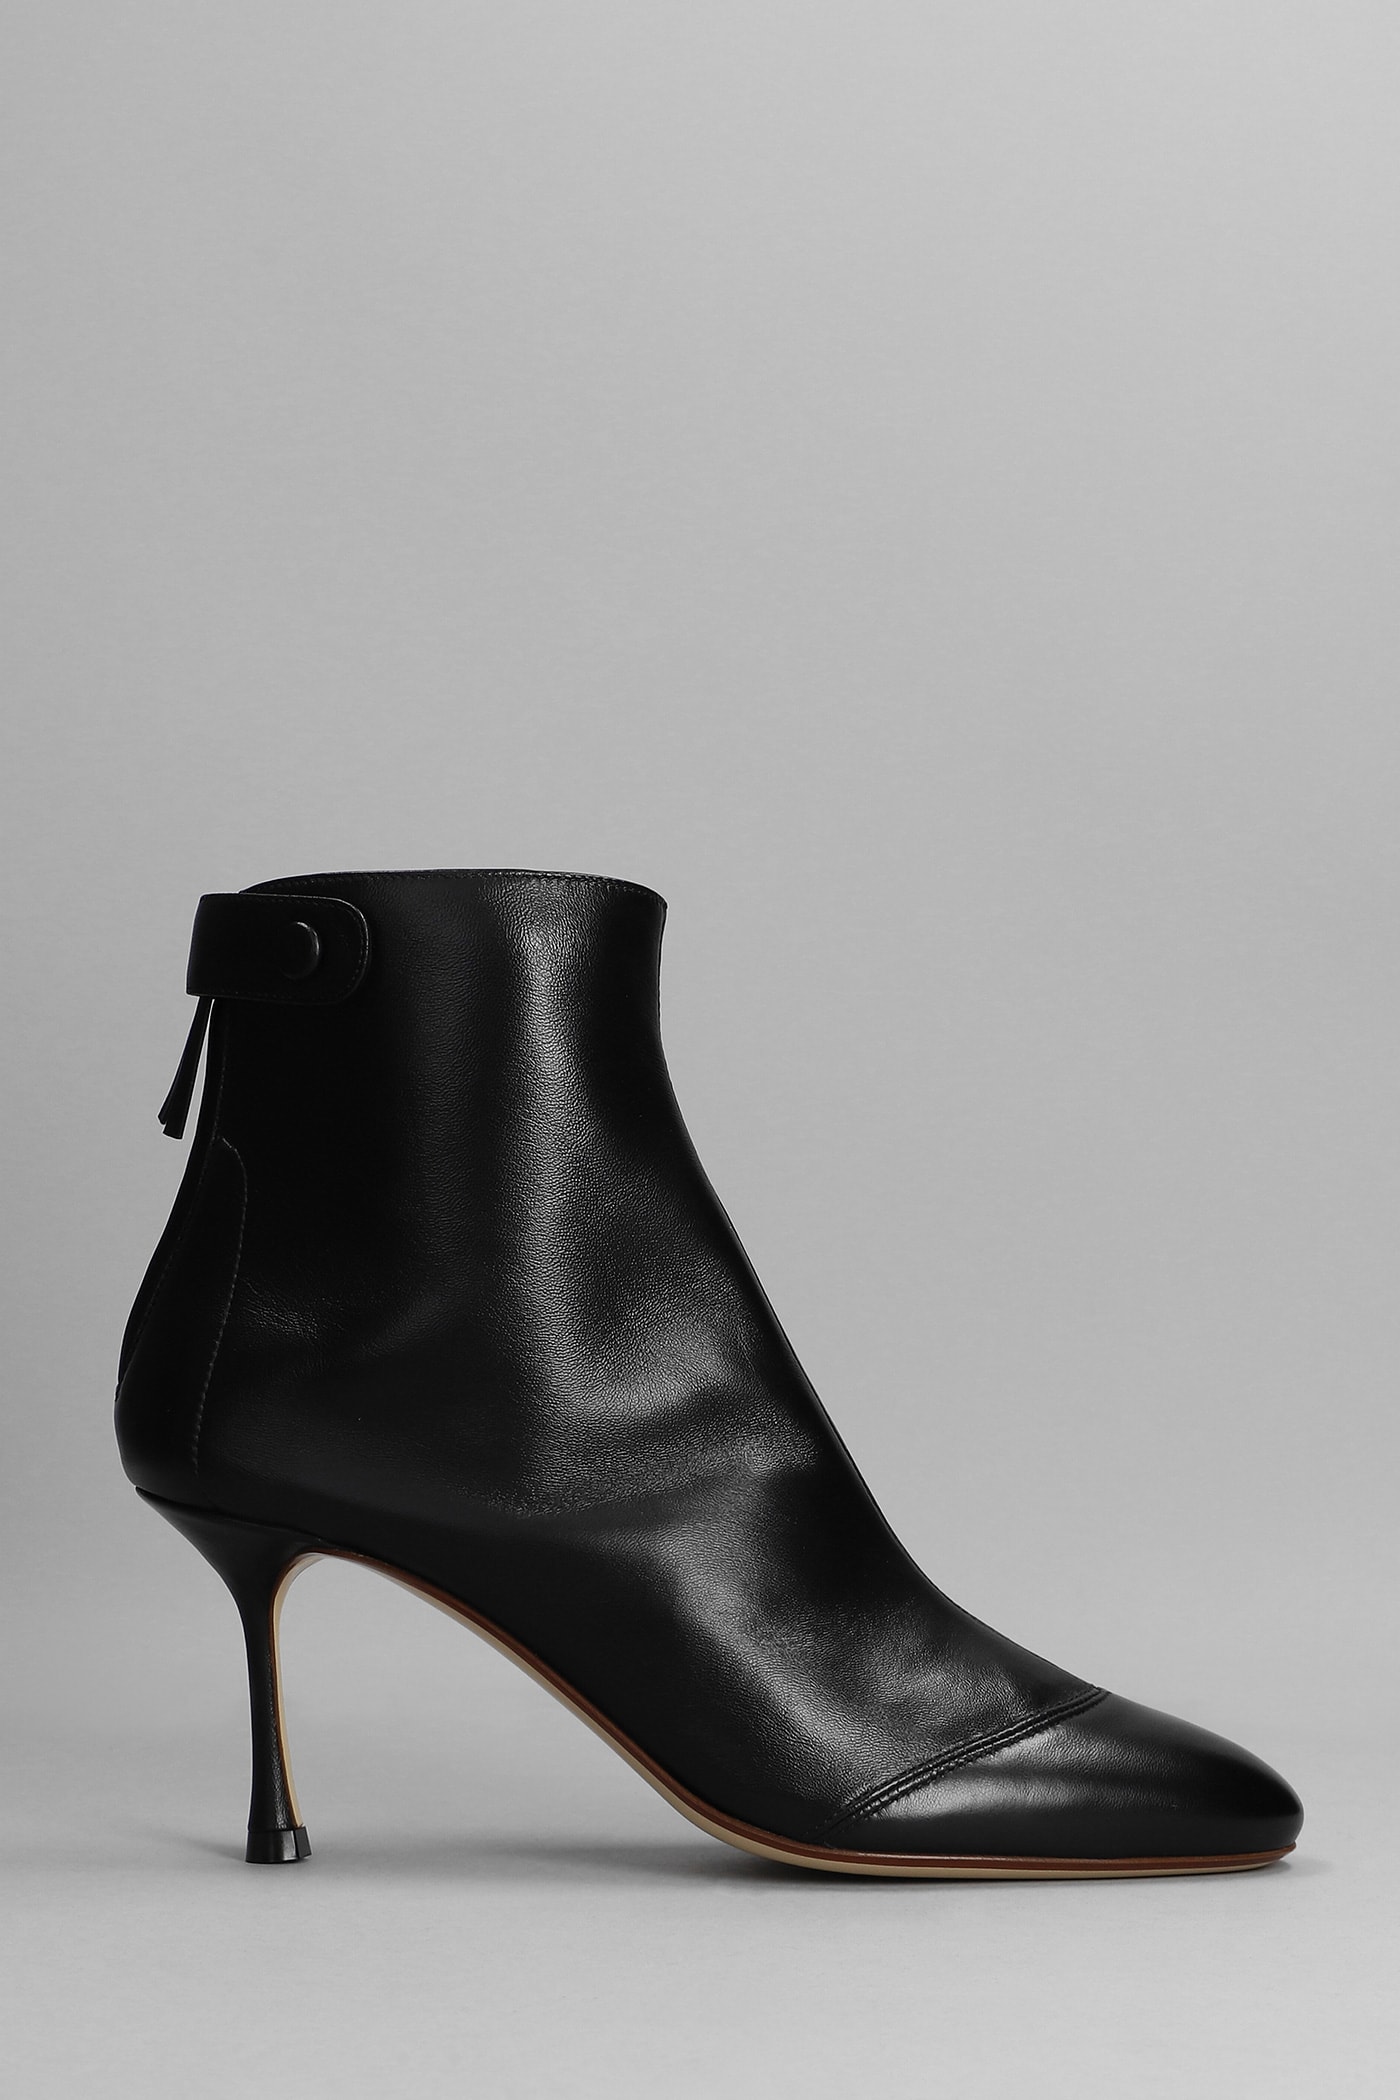 Francesco Russo High Heels Ankle Boots In Black Leather